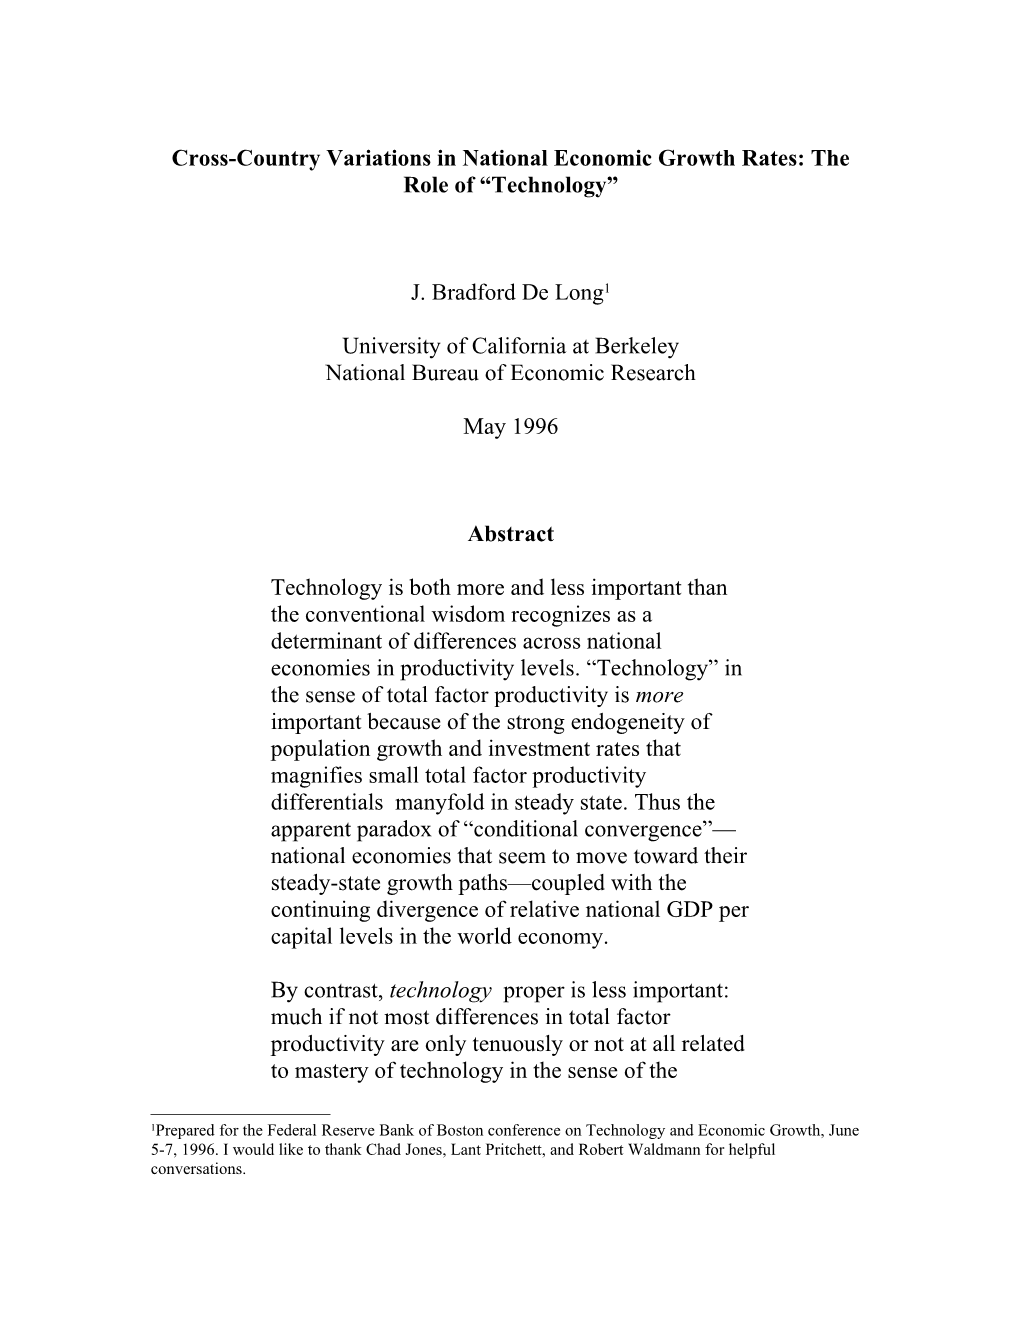 Cross-Country Variations in National Economic Growth Rates: the Role of Technology